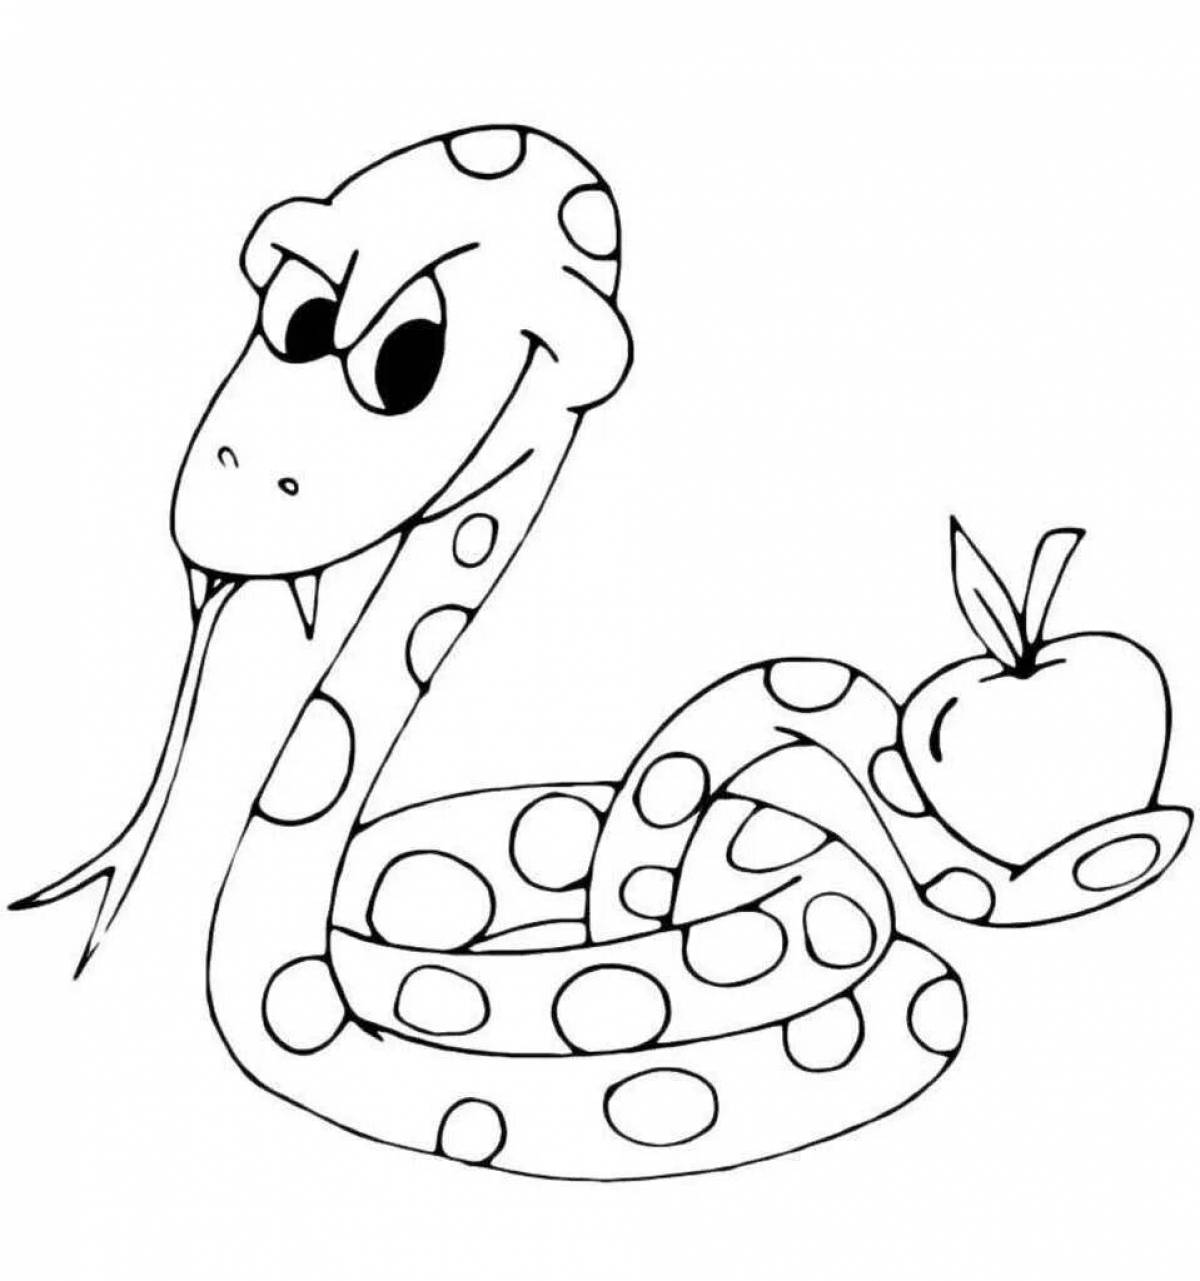 Colorful snake coloring page for 3-4 year olds